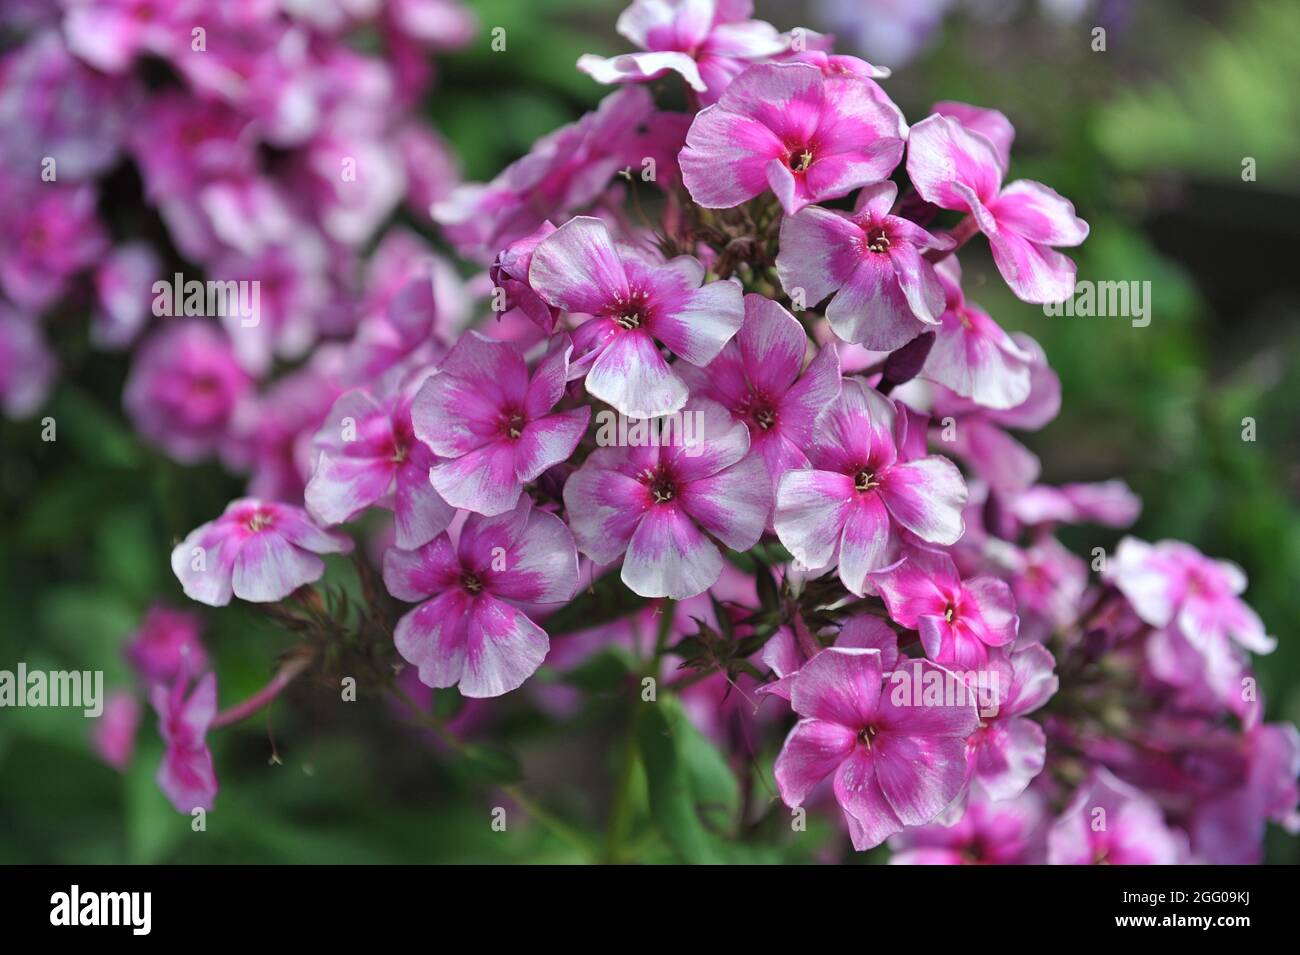 Pink phlox paniculata Venets (The Crown) with a silvery smoky pattern blooms in a garden in July Stock Photo